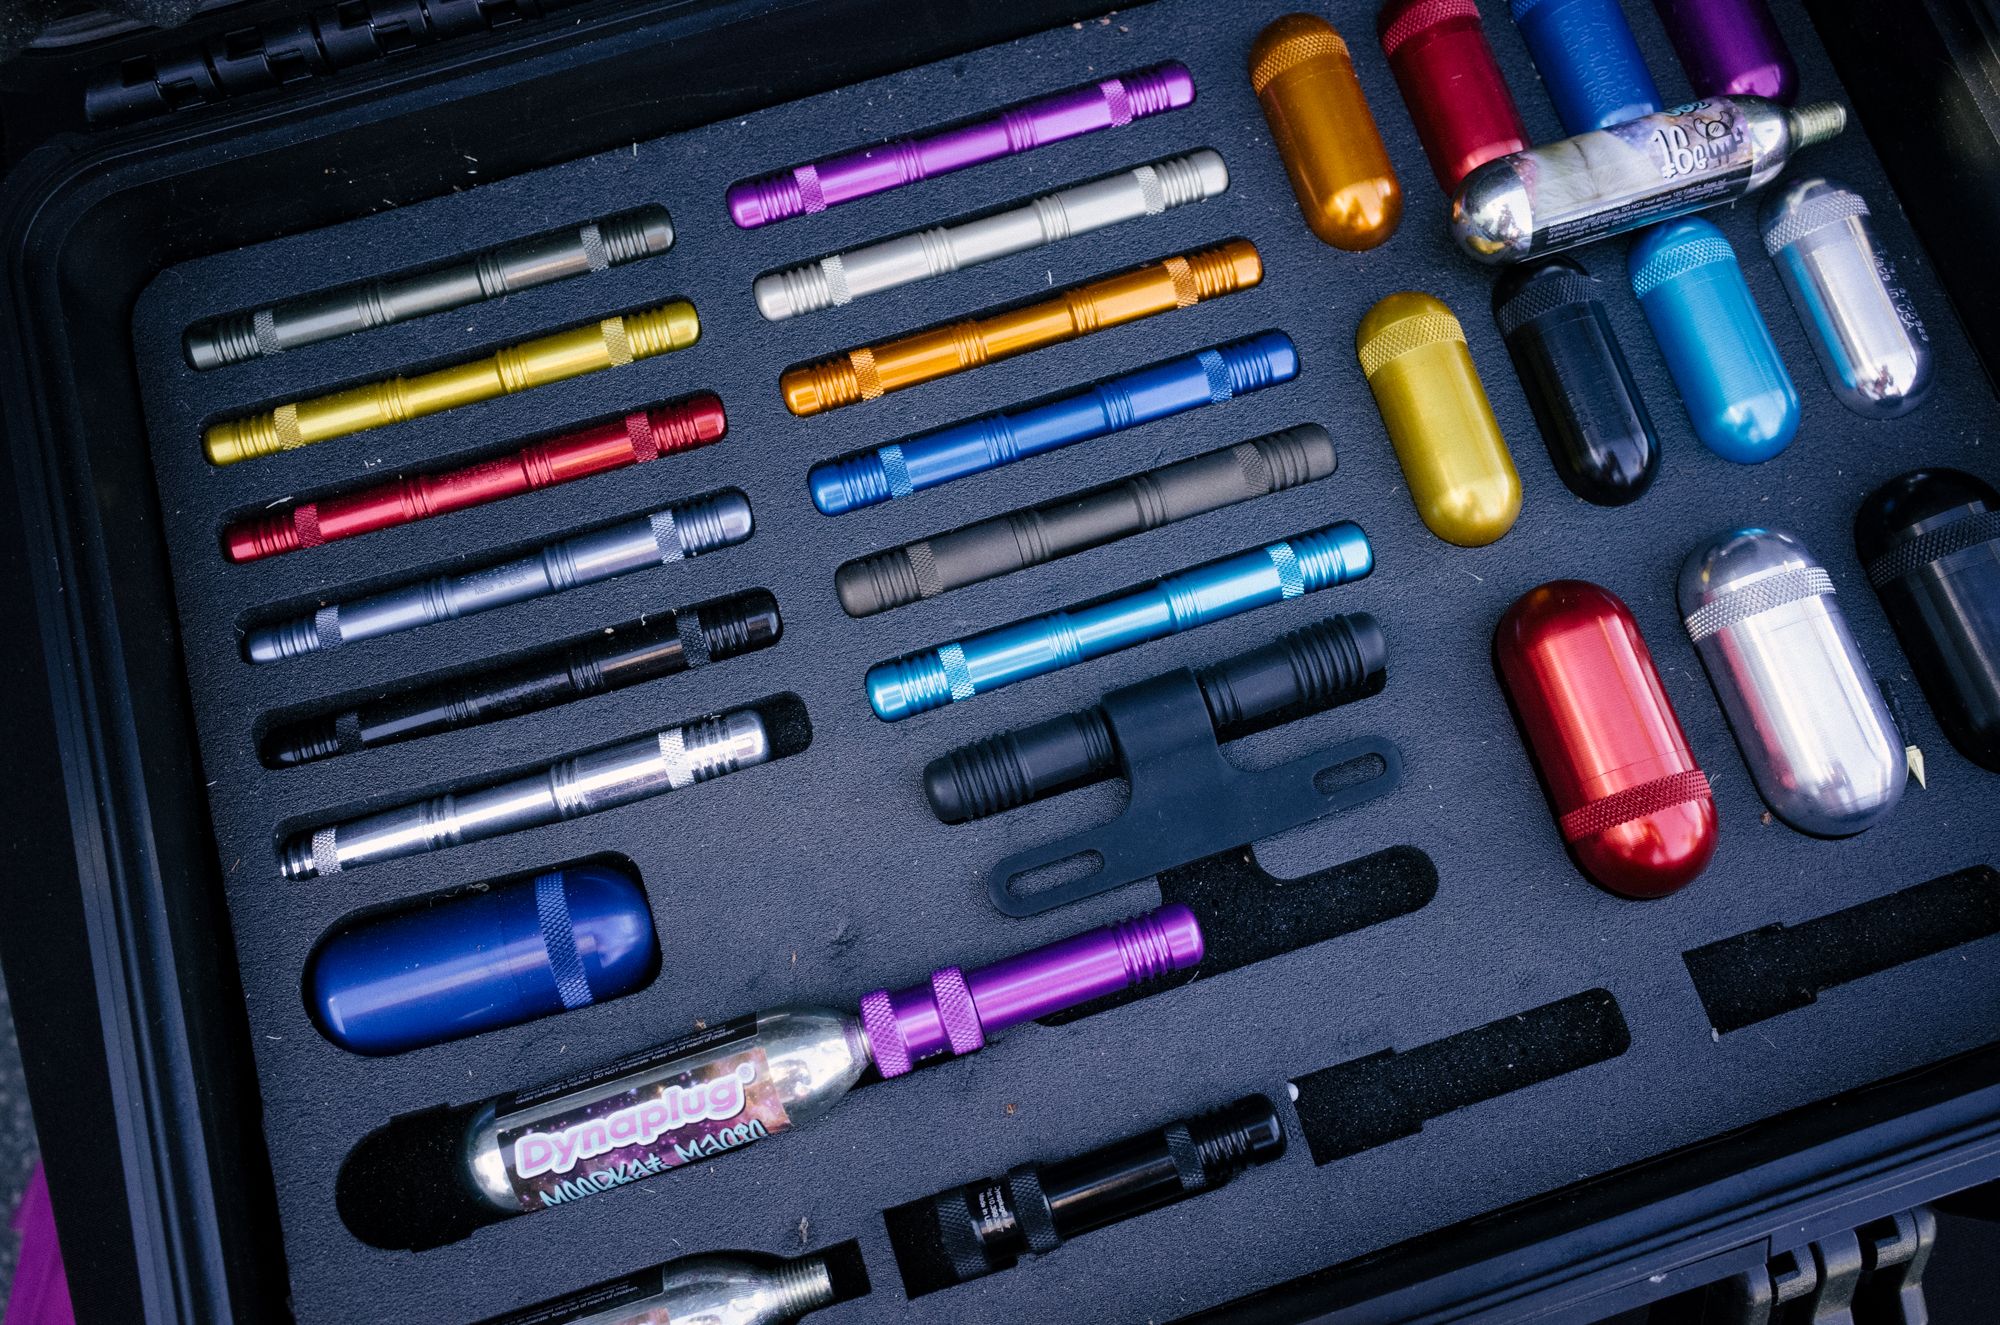 Dynaplug was showing off their plug kits in all the pretty colors. Plus a yet-to-be-released hidden bar end tool. 